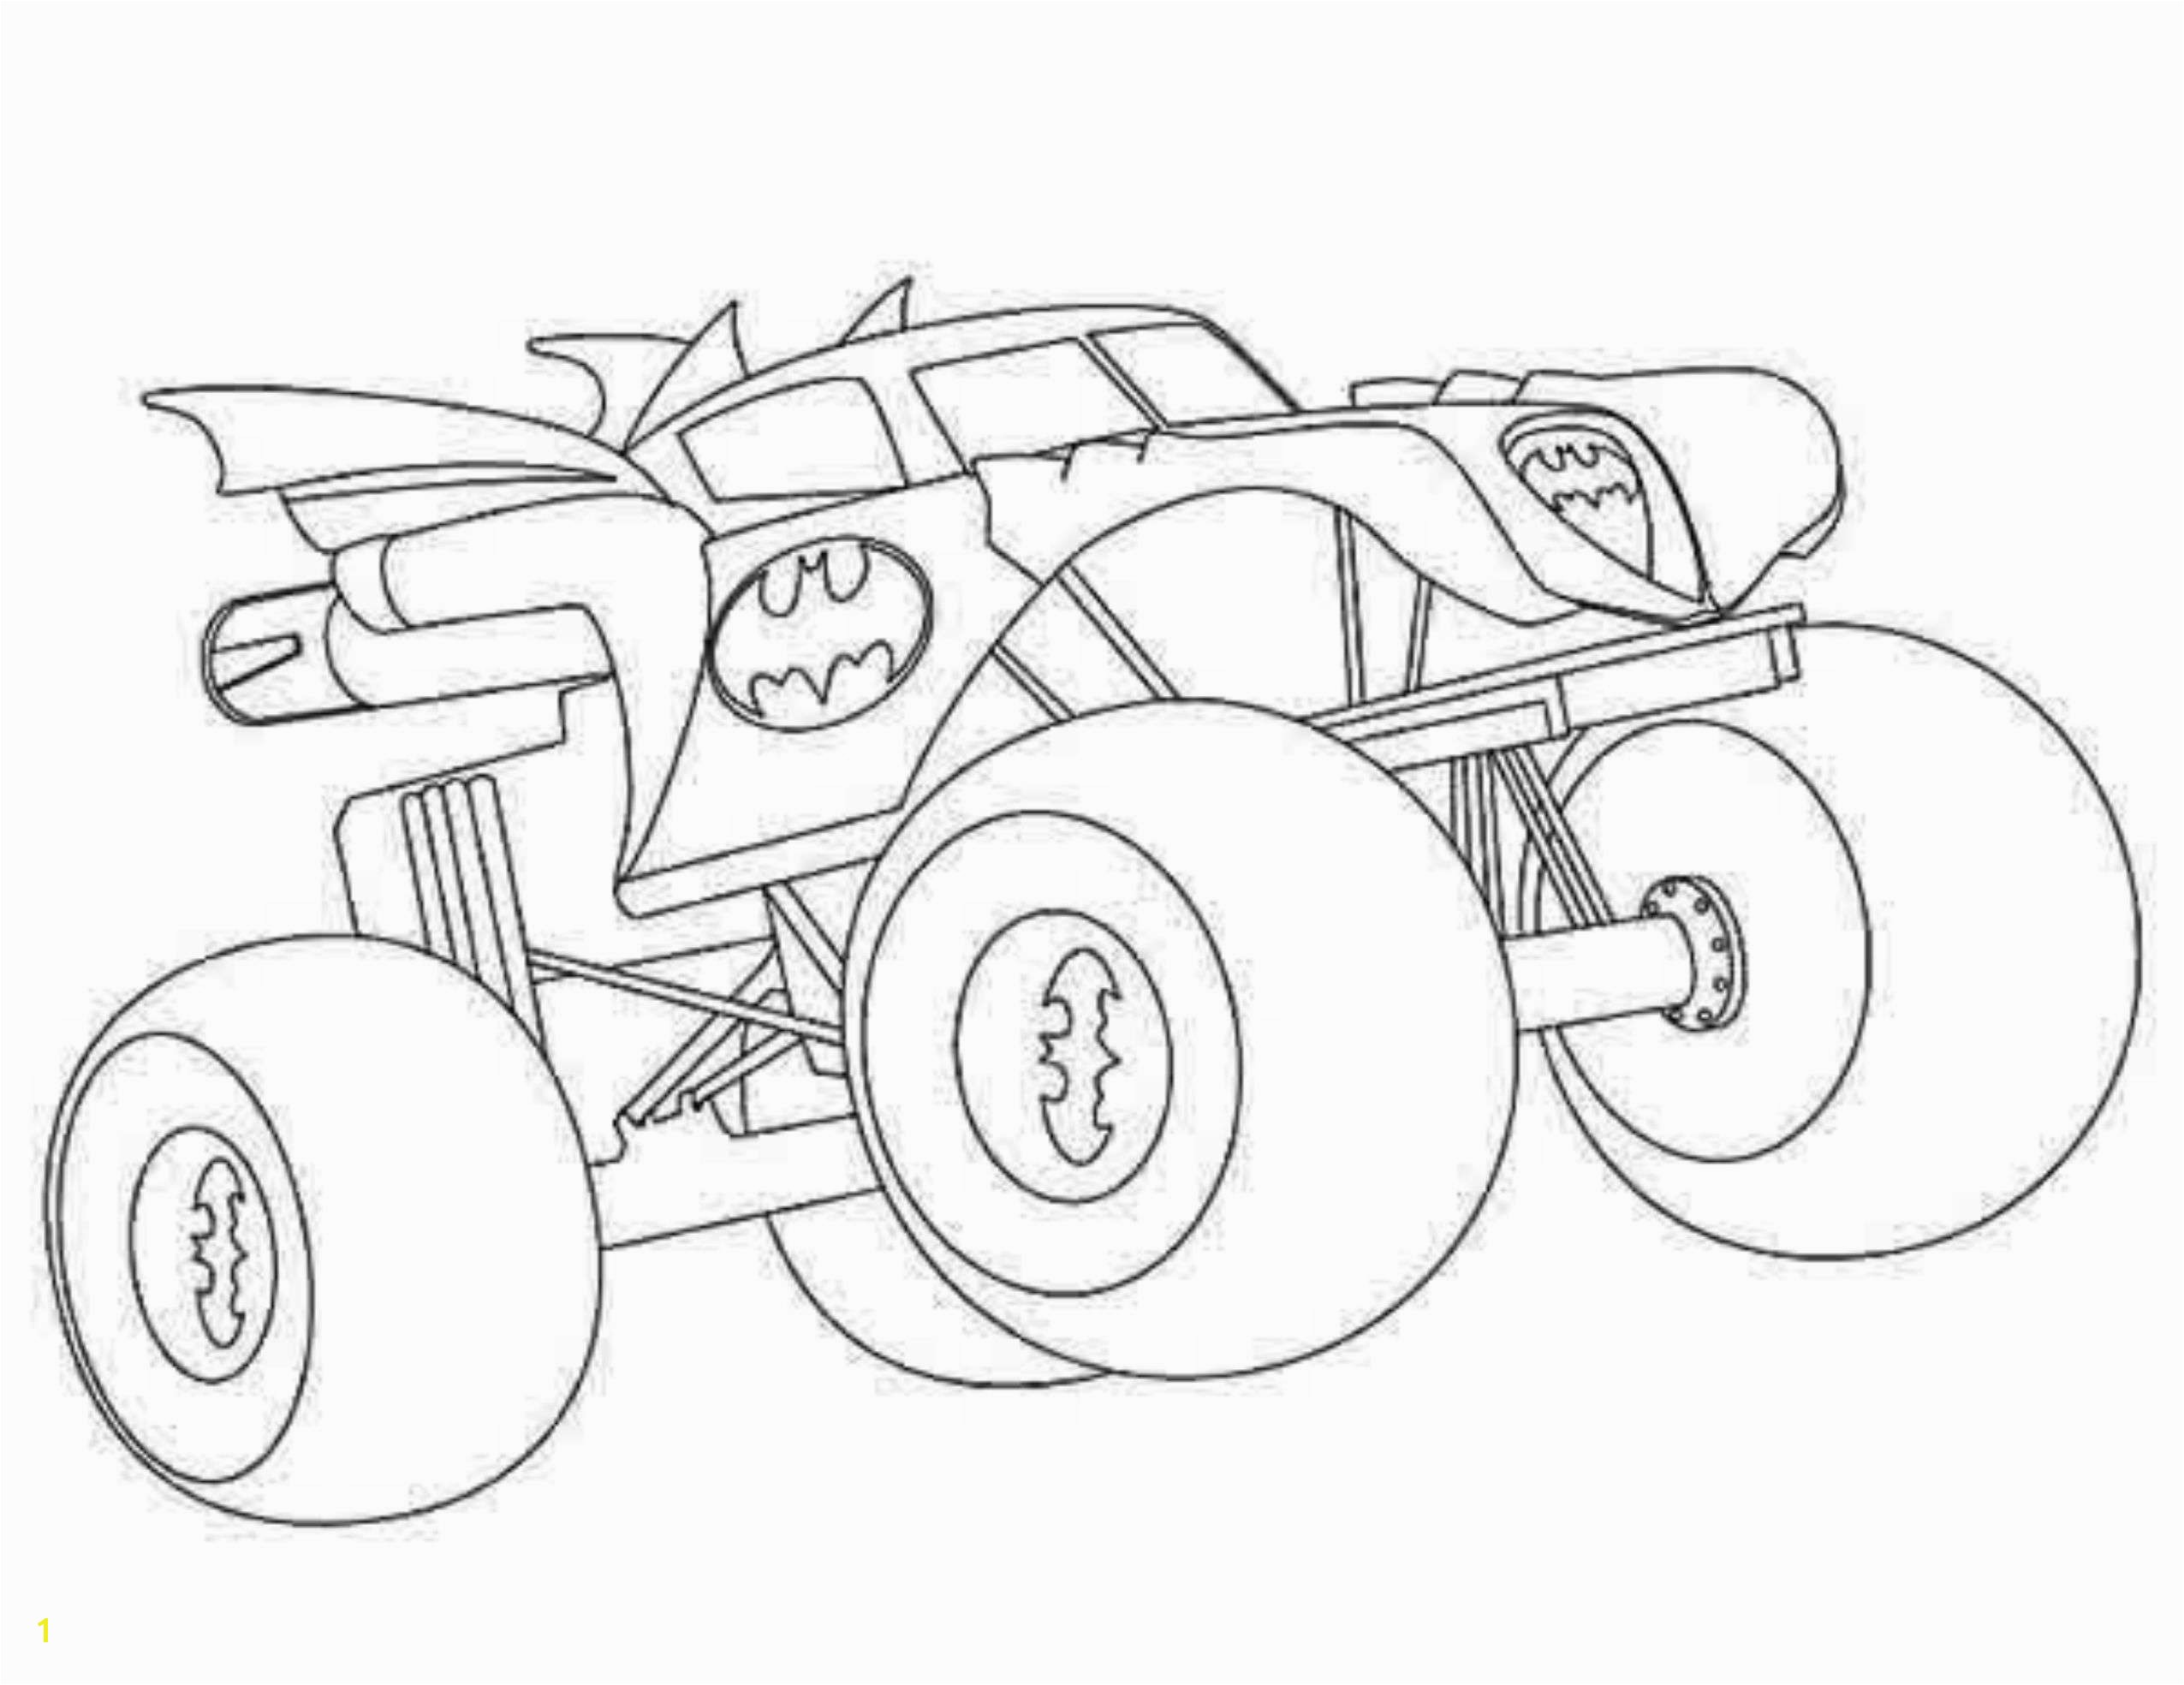 Coloring Book Pages Of Monster Trucks Monster Jam Coloring Pages Free